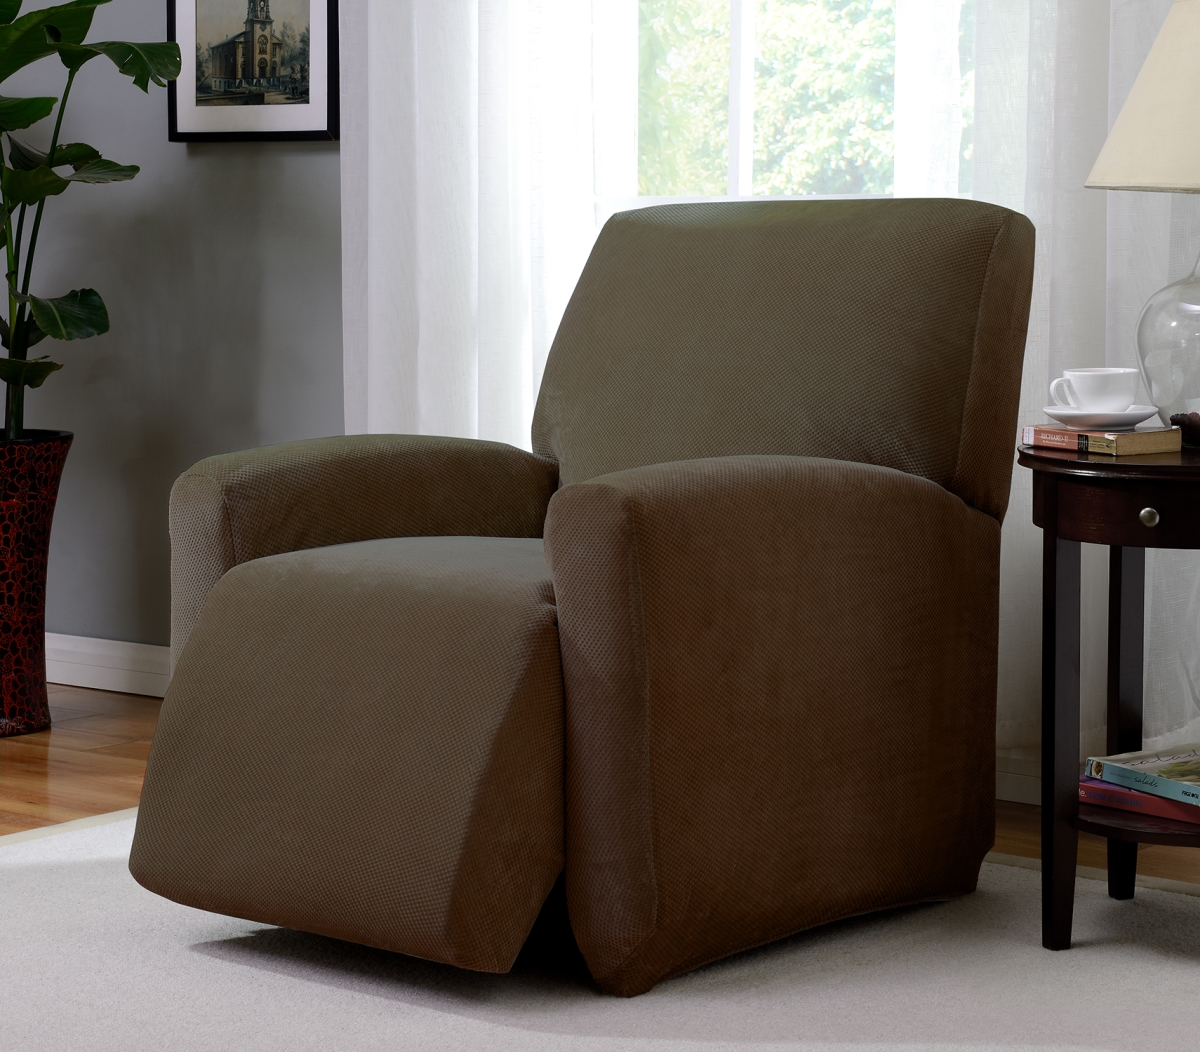 Picture of Madison DAY-LGRECL-CH Kathy Ireland Day Break Large Recliner Slipcover, Chestnut